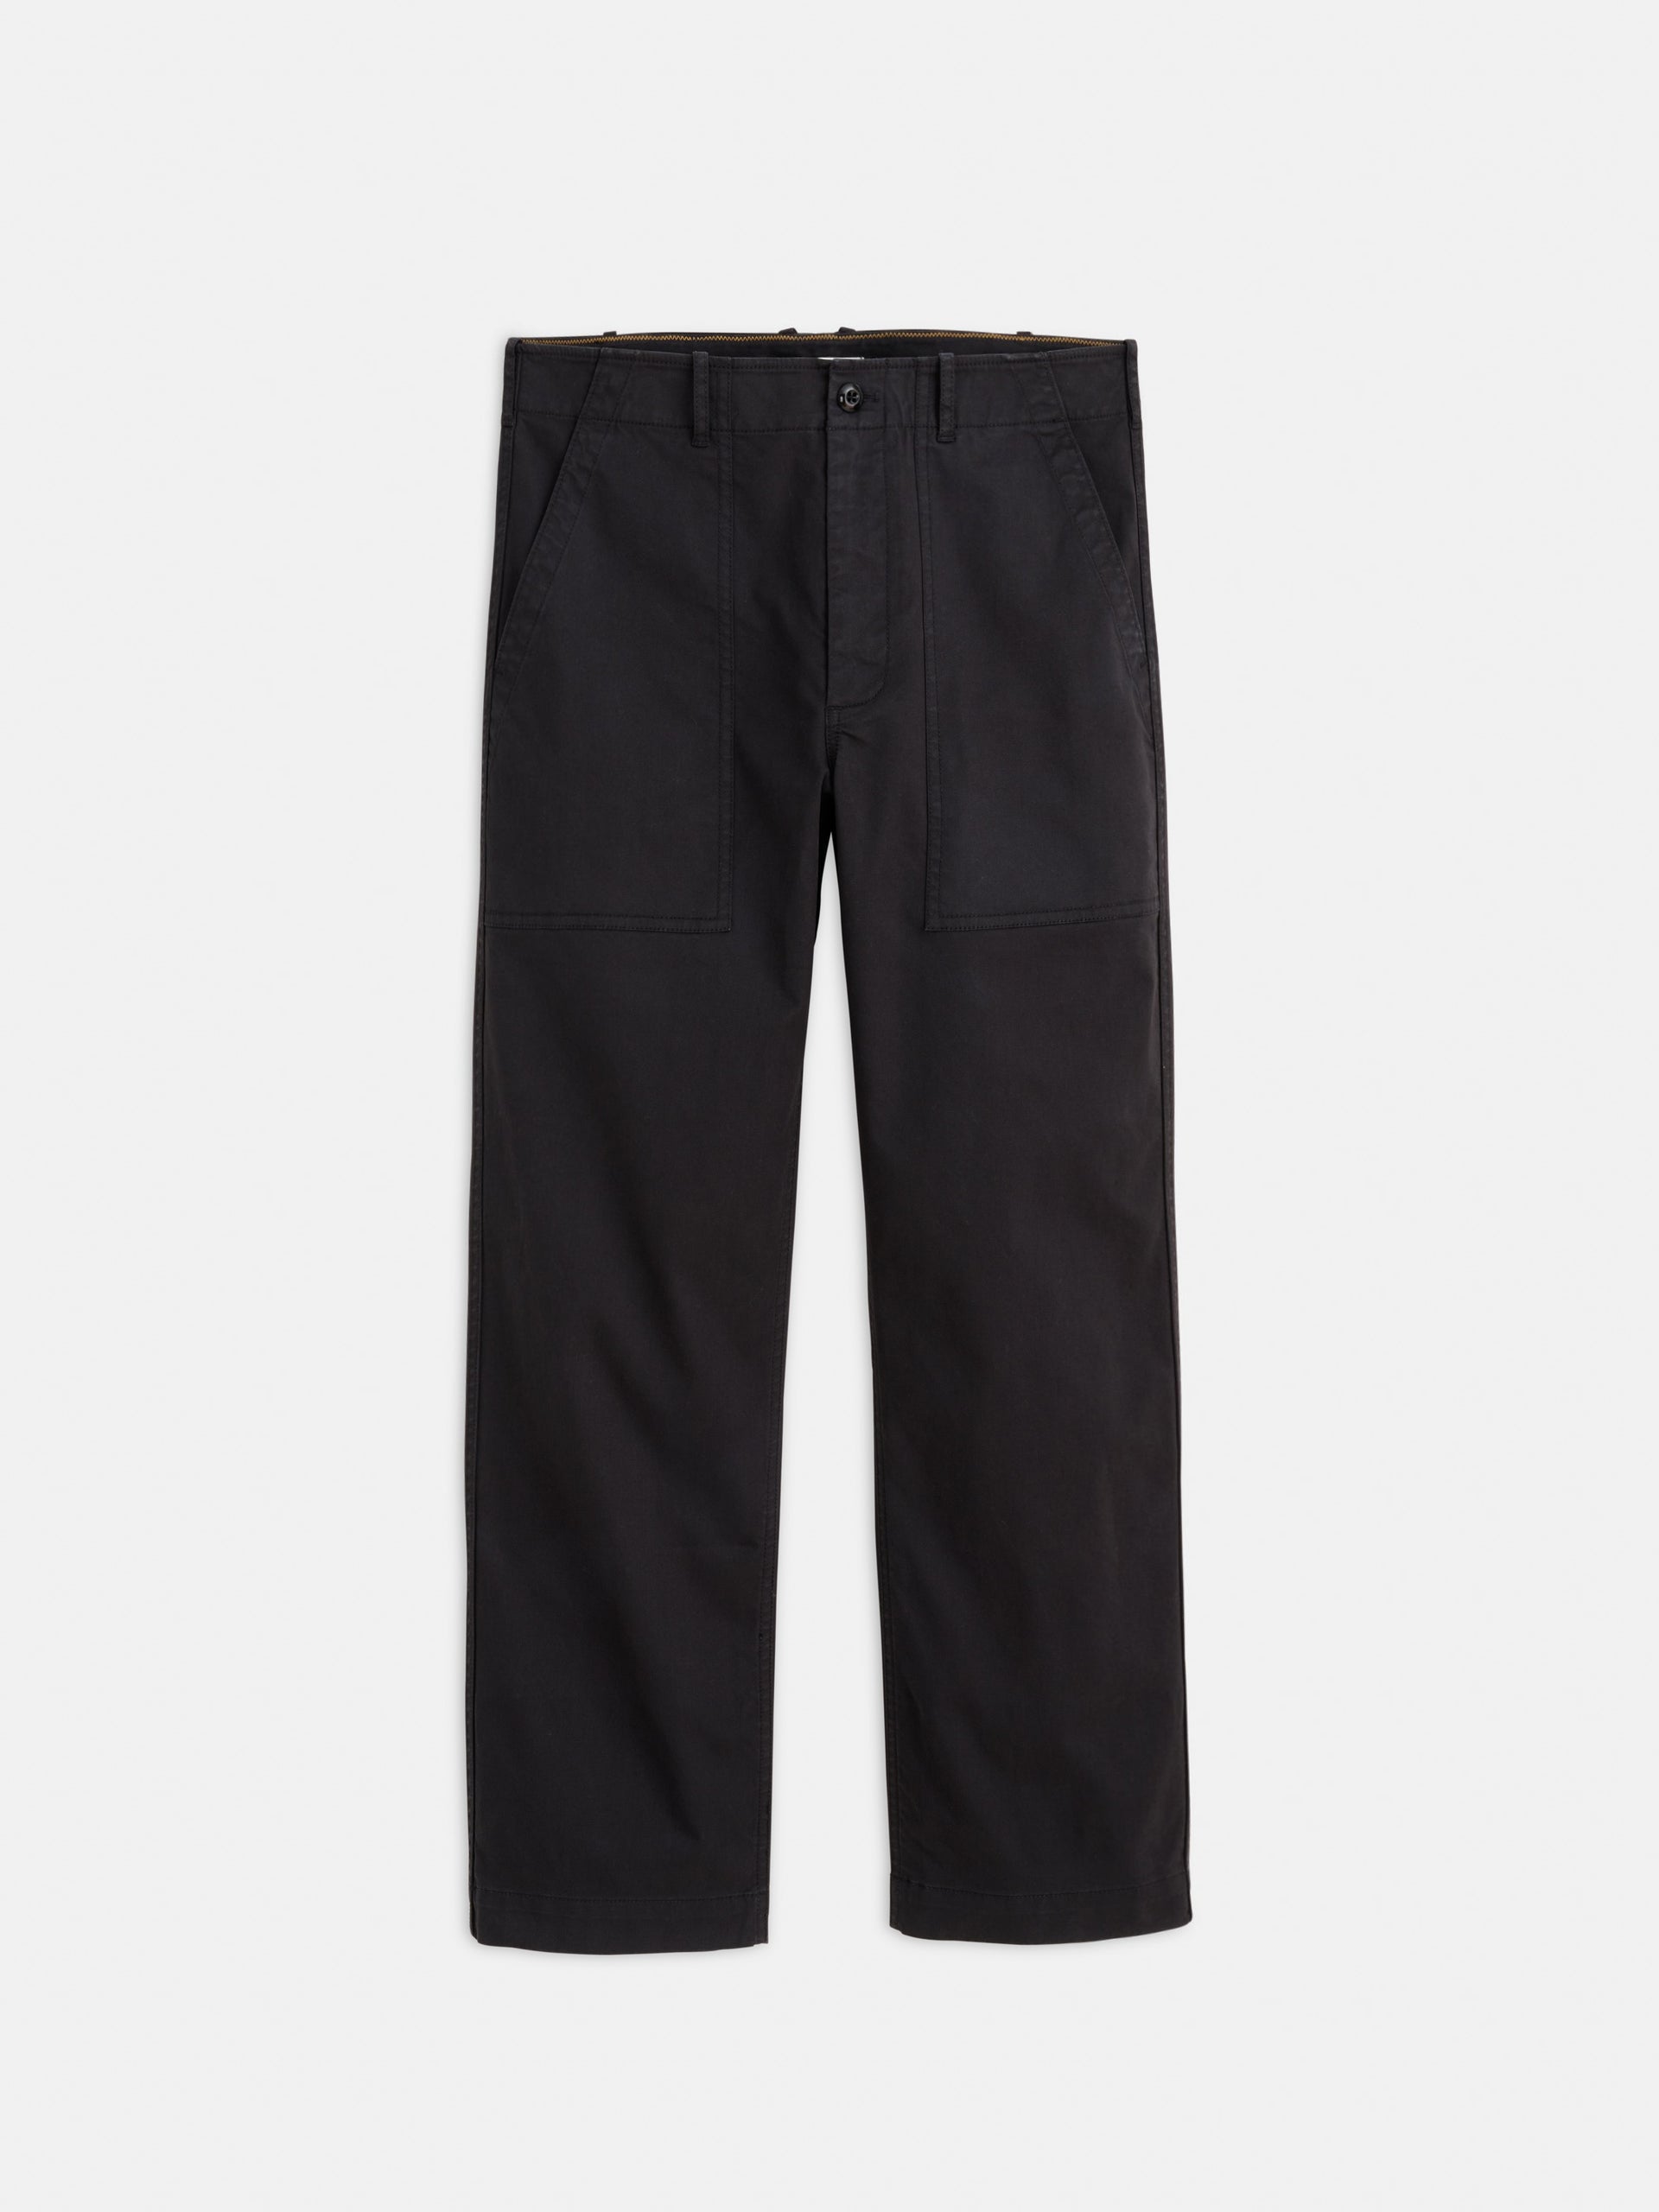 ALEX MILL FIELD PANT IN CHINO